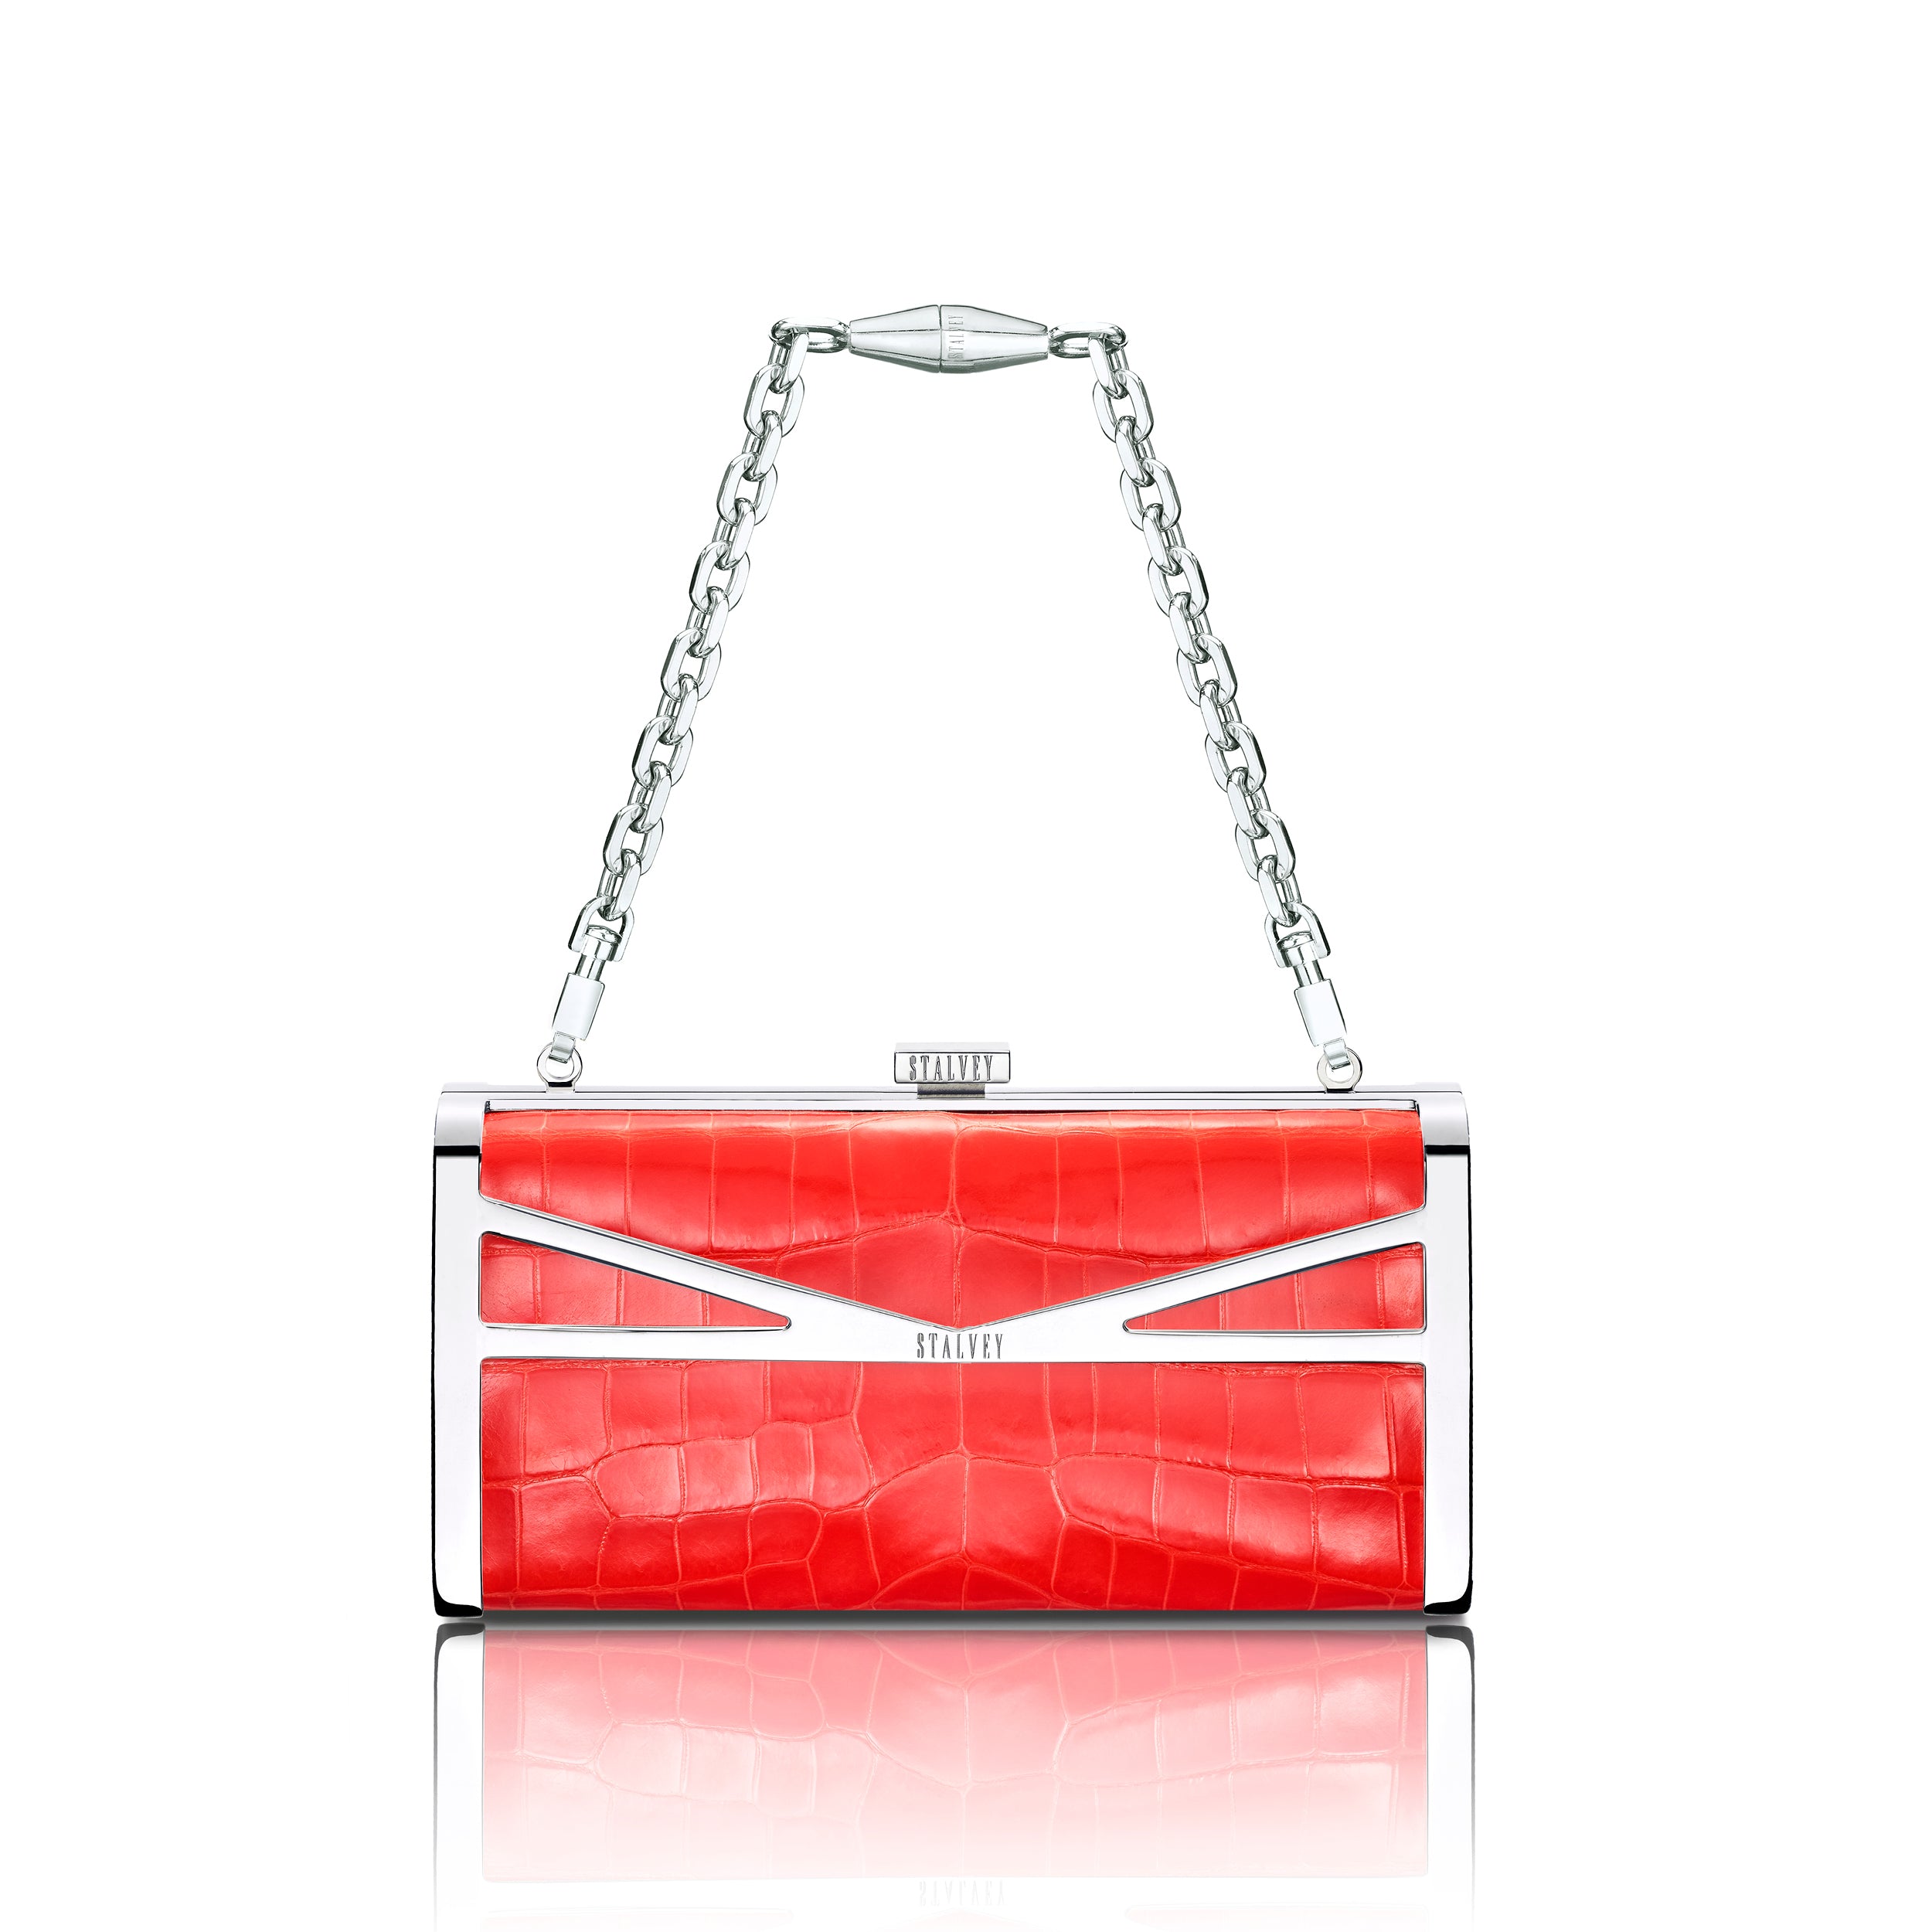 STALVEY Square Clutch in Neon Orange Alligator with Palladium Hardware Front View with Chain